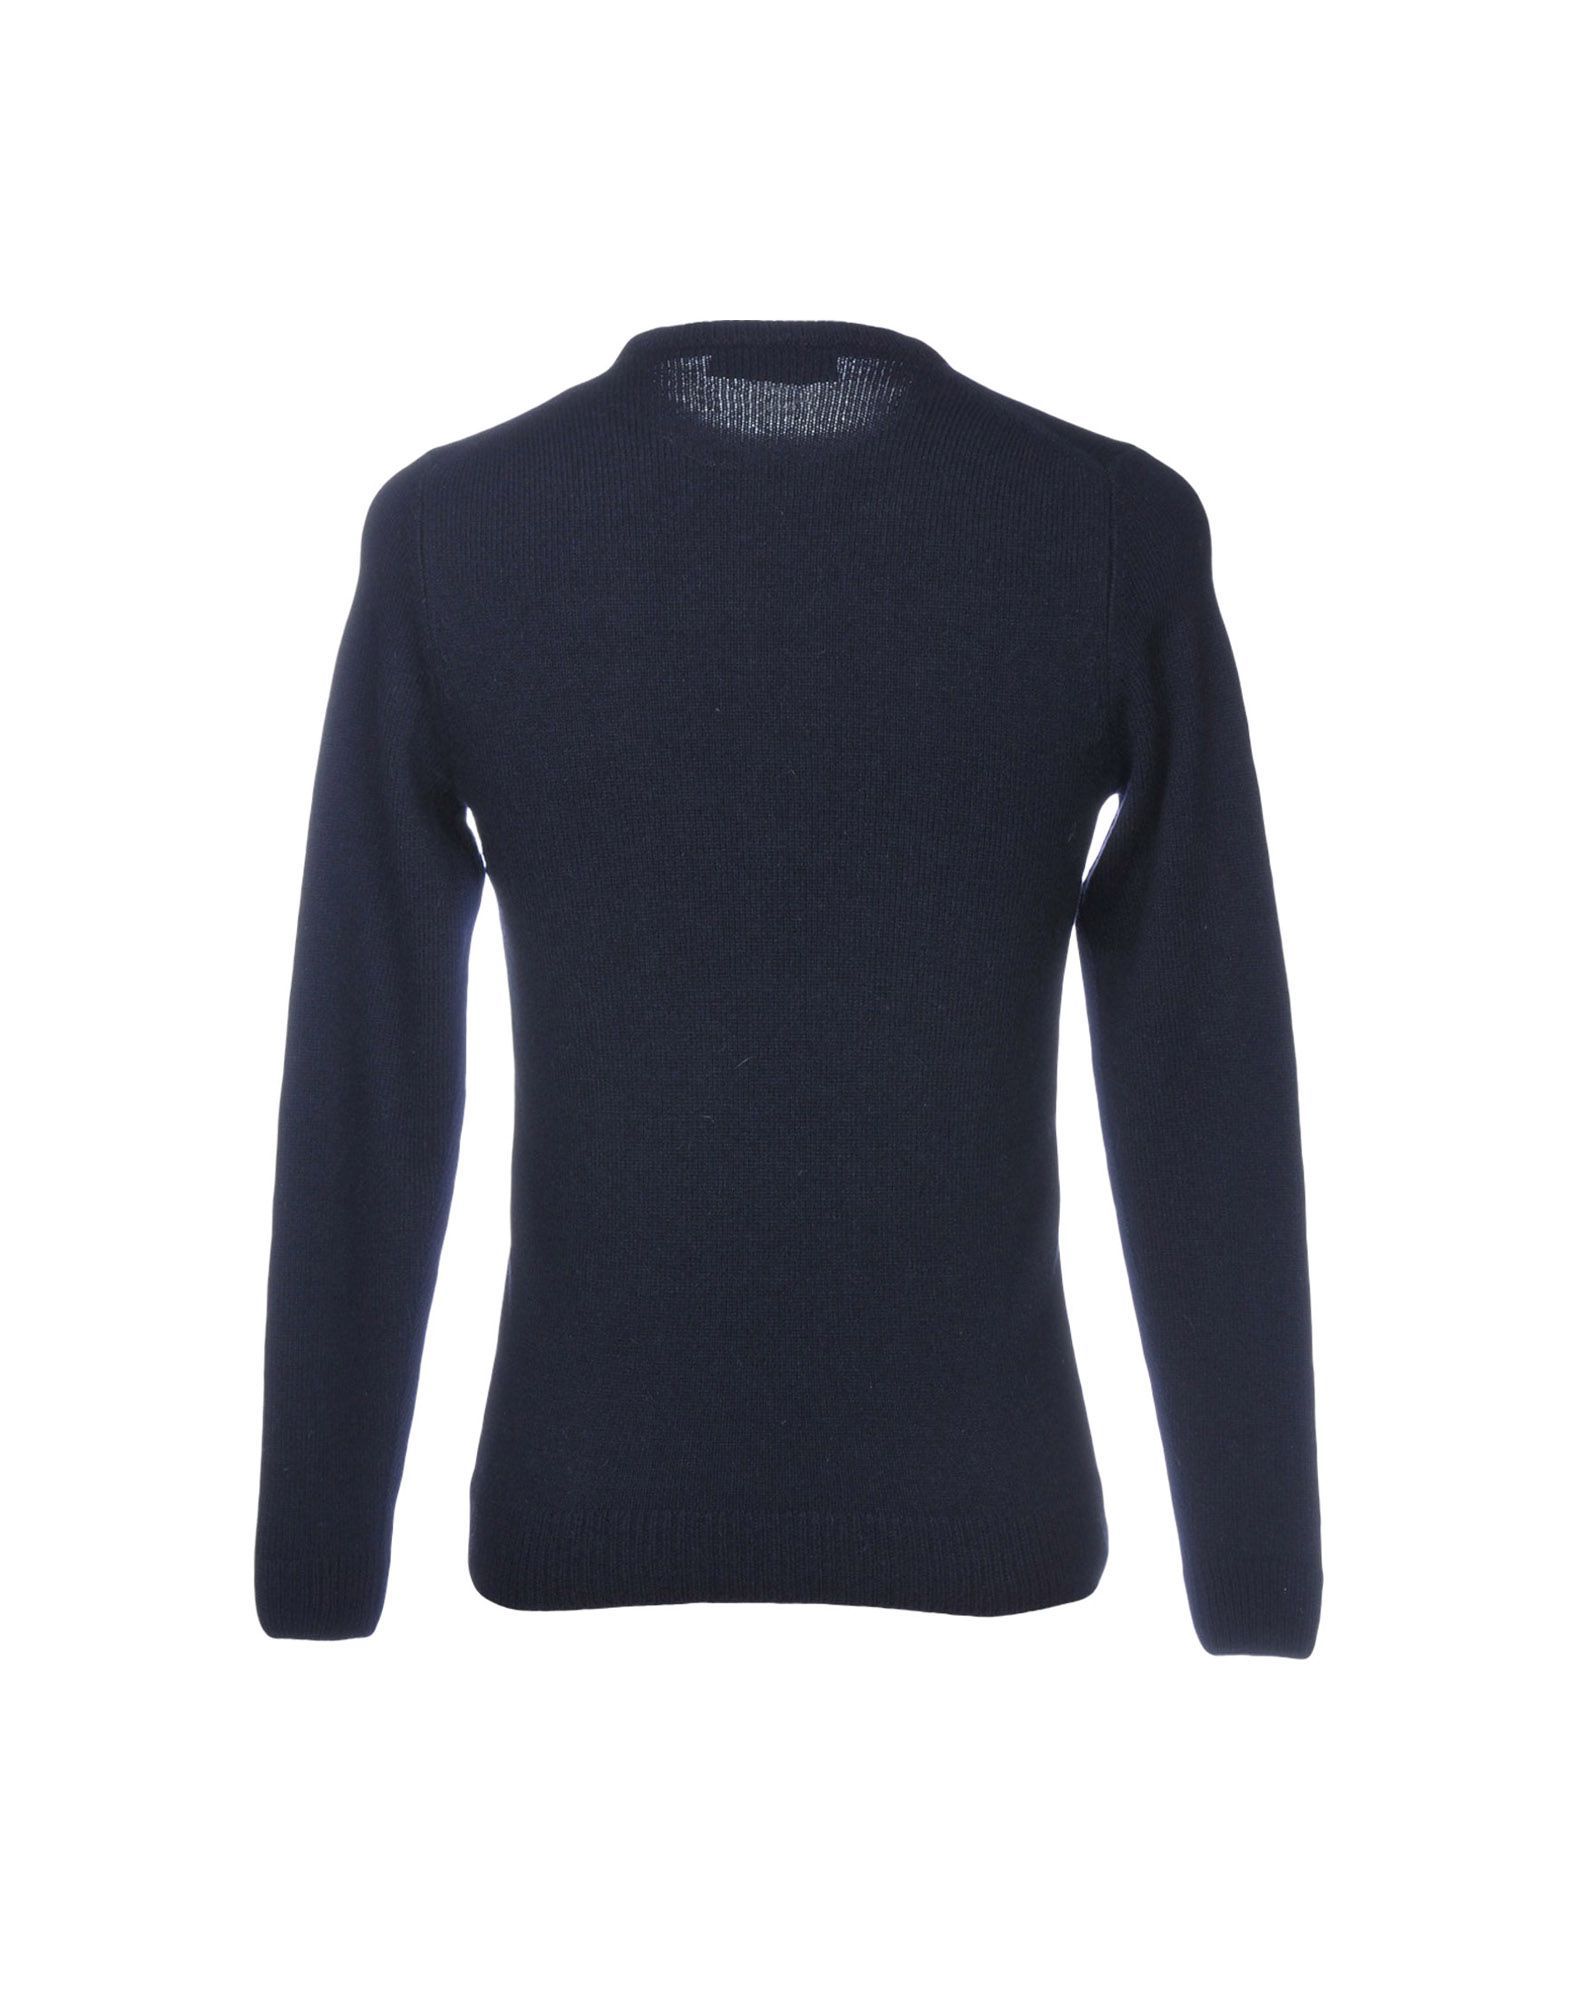 Knitted<br>No appliqu�s<br>Basic solid colour<br>Round collar<br>Lightweight knitted<br>Long sleeves<br>No pockets<br>